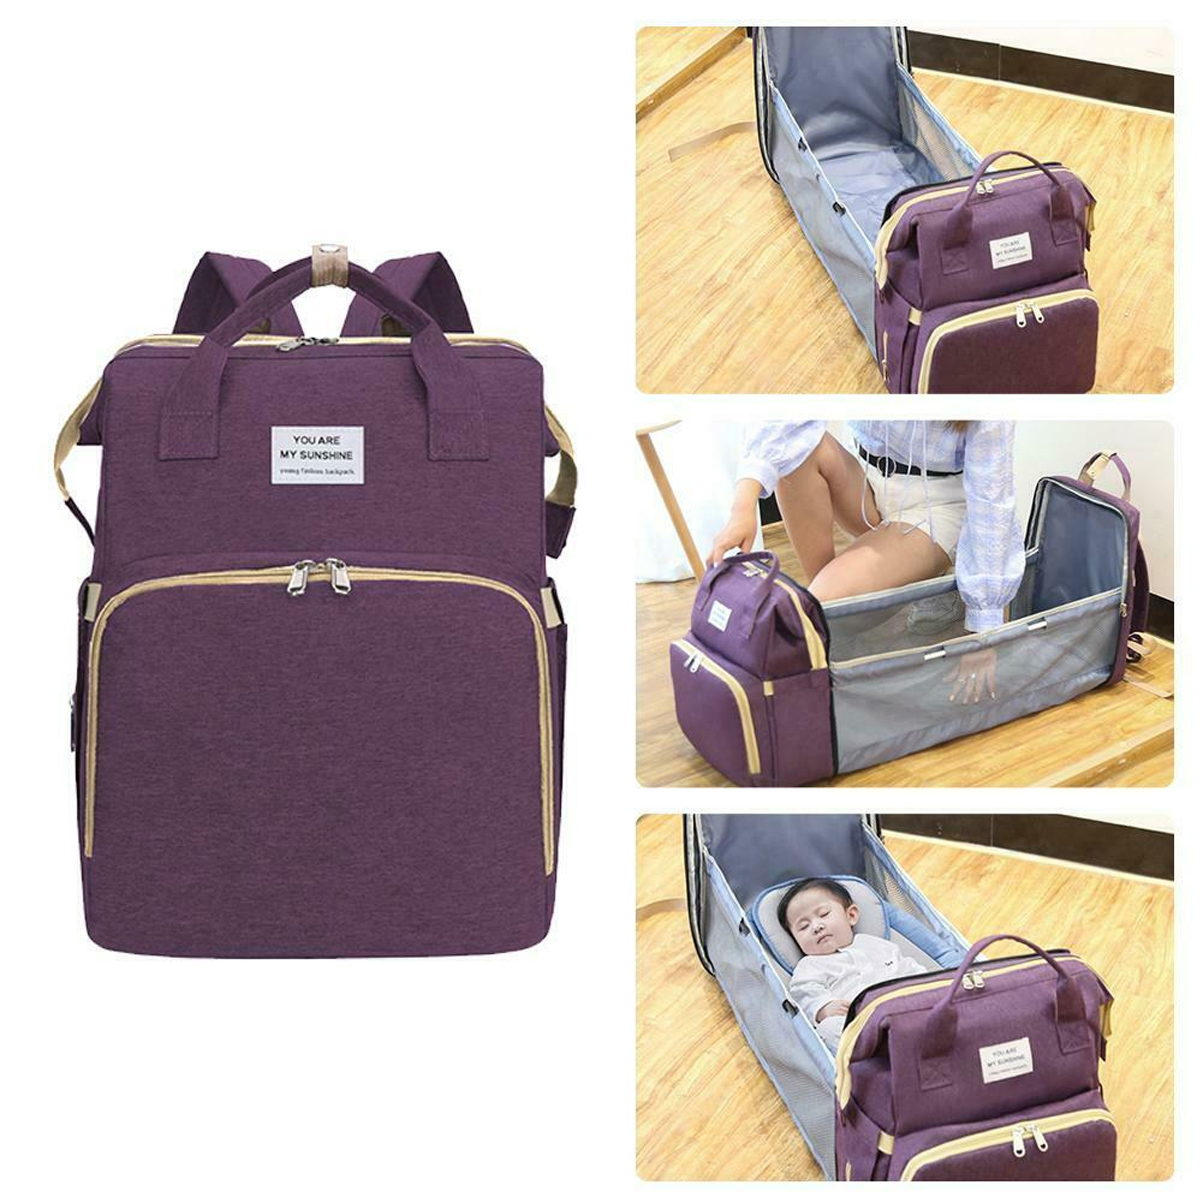 Portable-Diaper-Bag-Folding-Baby-Travel-Large-Backapack-Outdoor-Foldable-Baby-Bed-Mommy-Bags-1759461-7